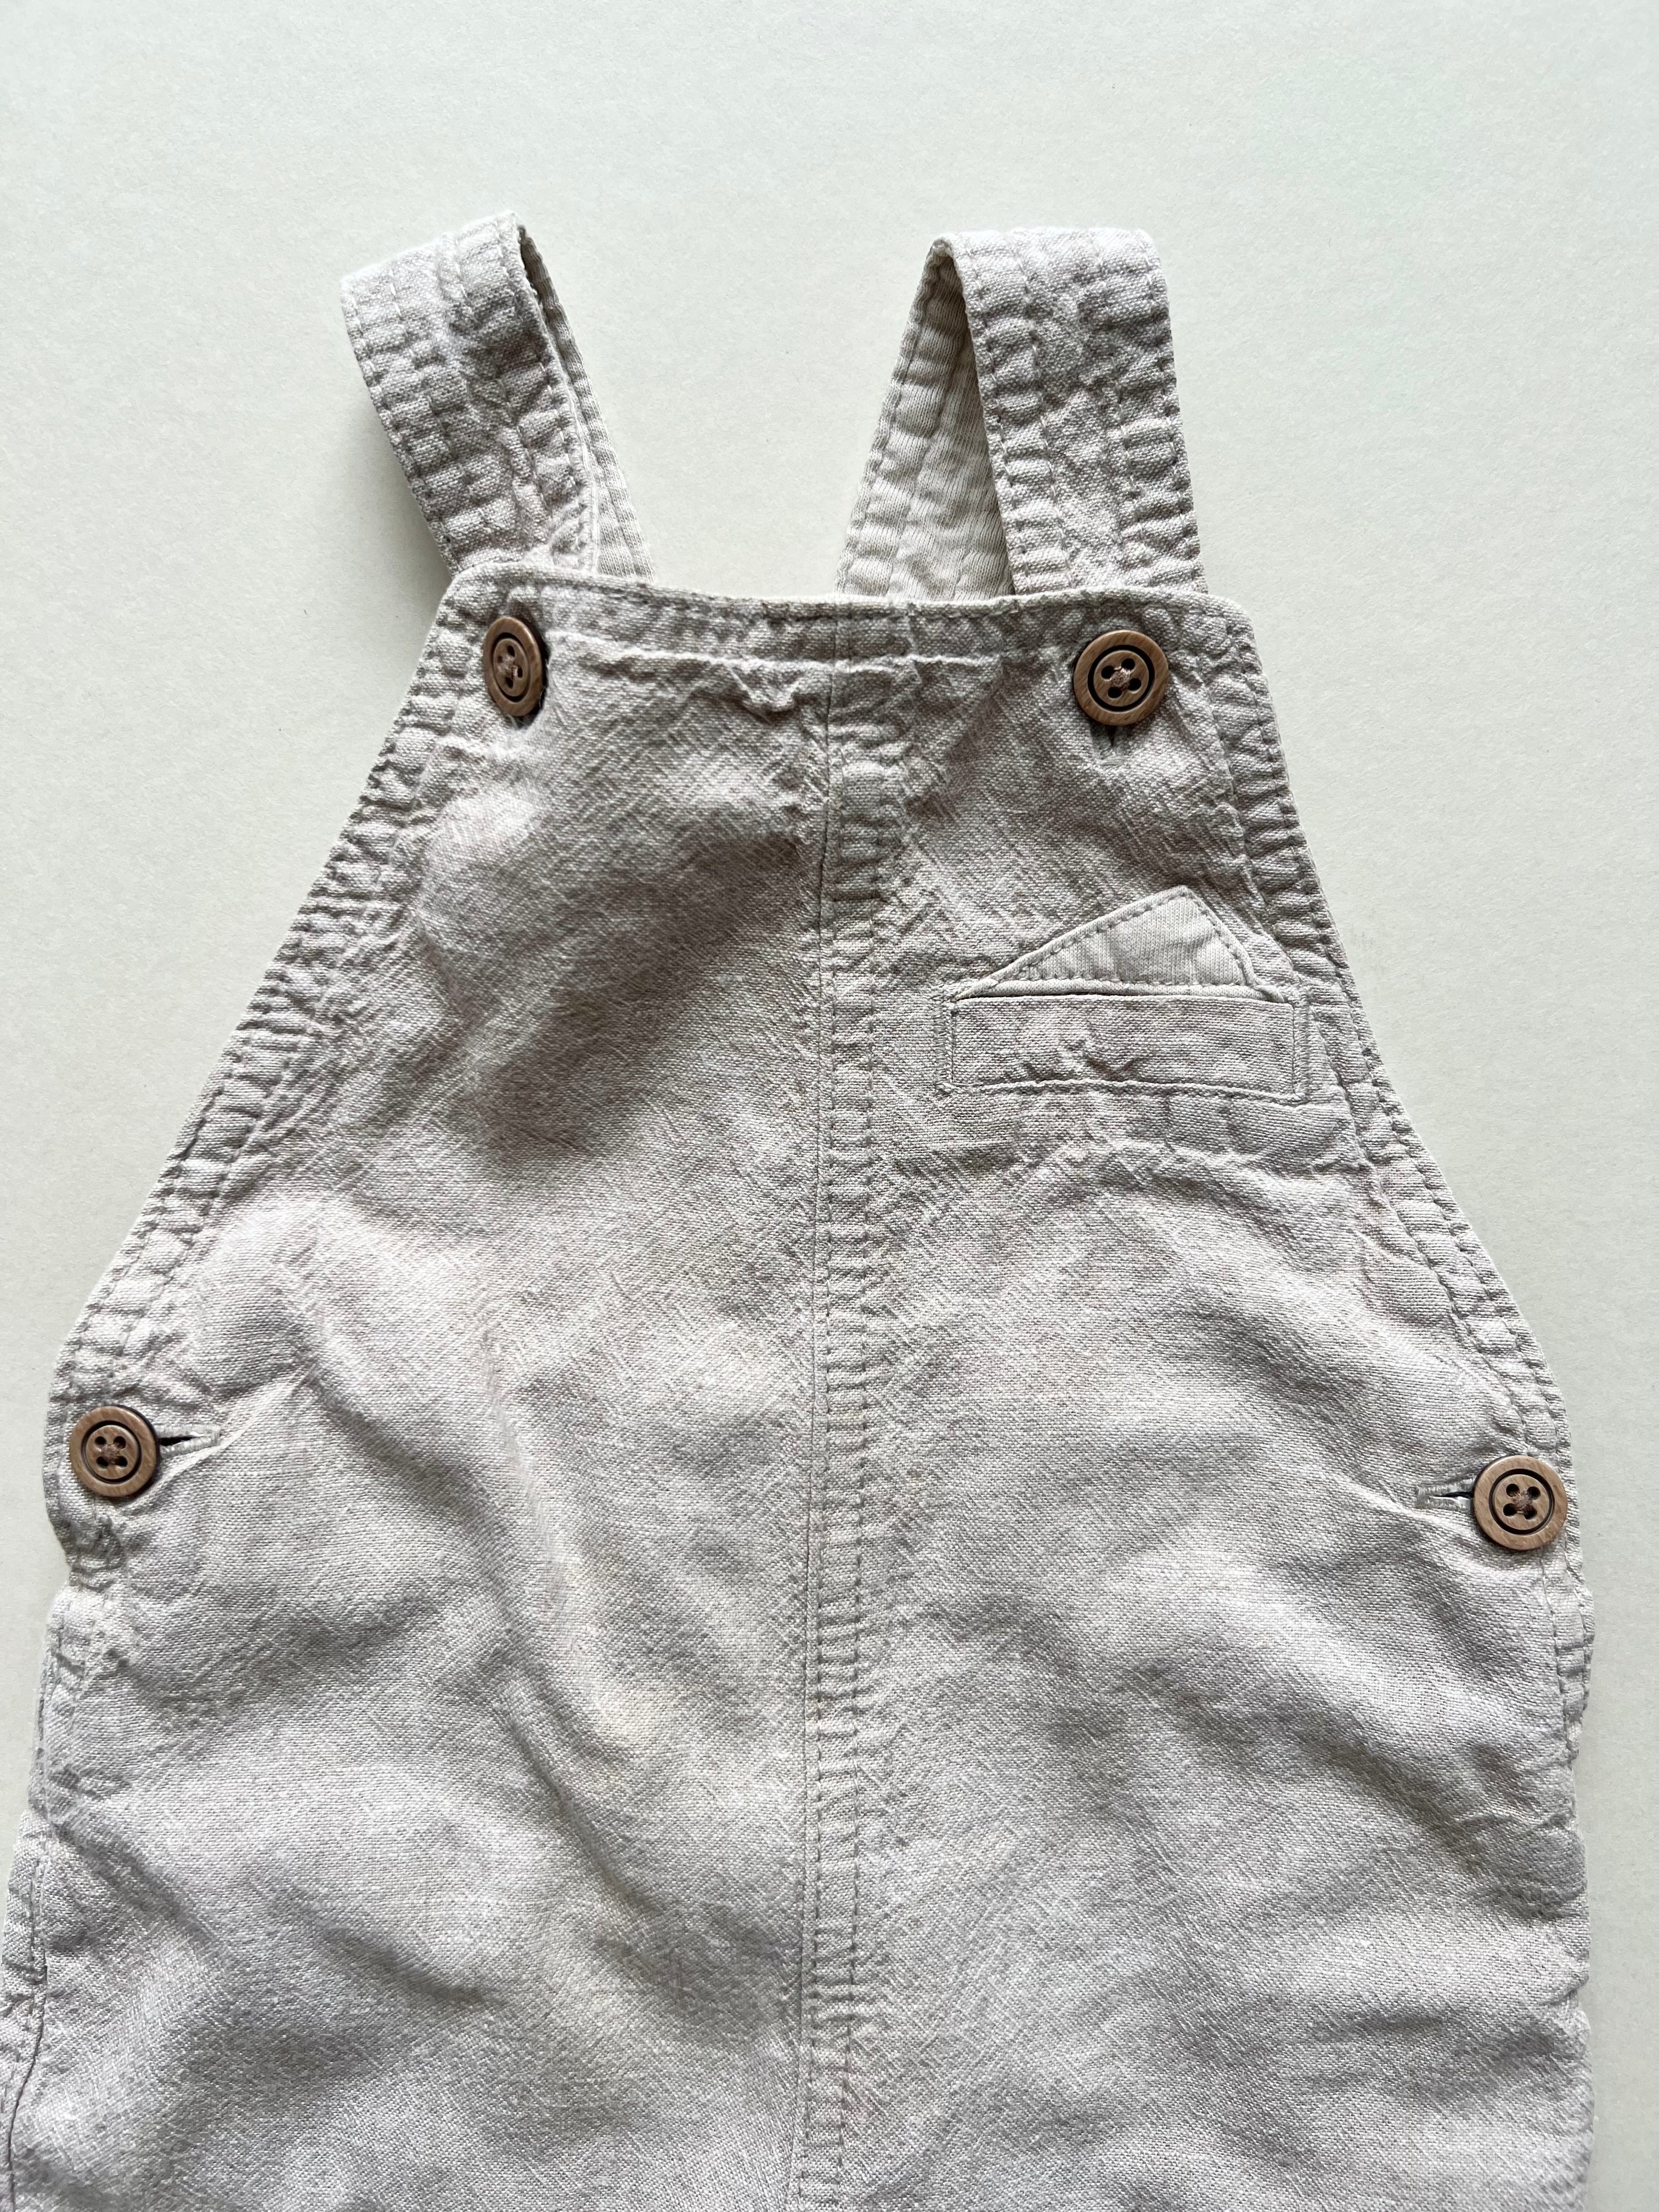 TU Oatmeal Dungarees 6-9 Months